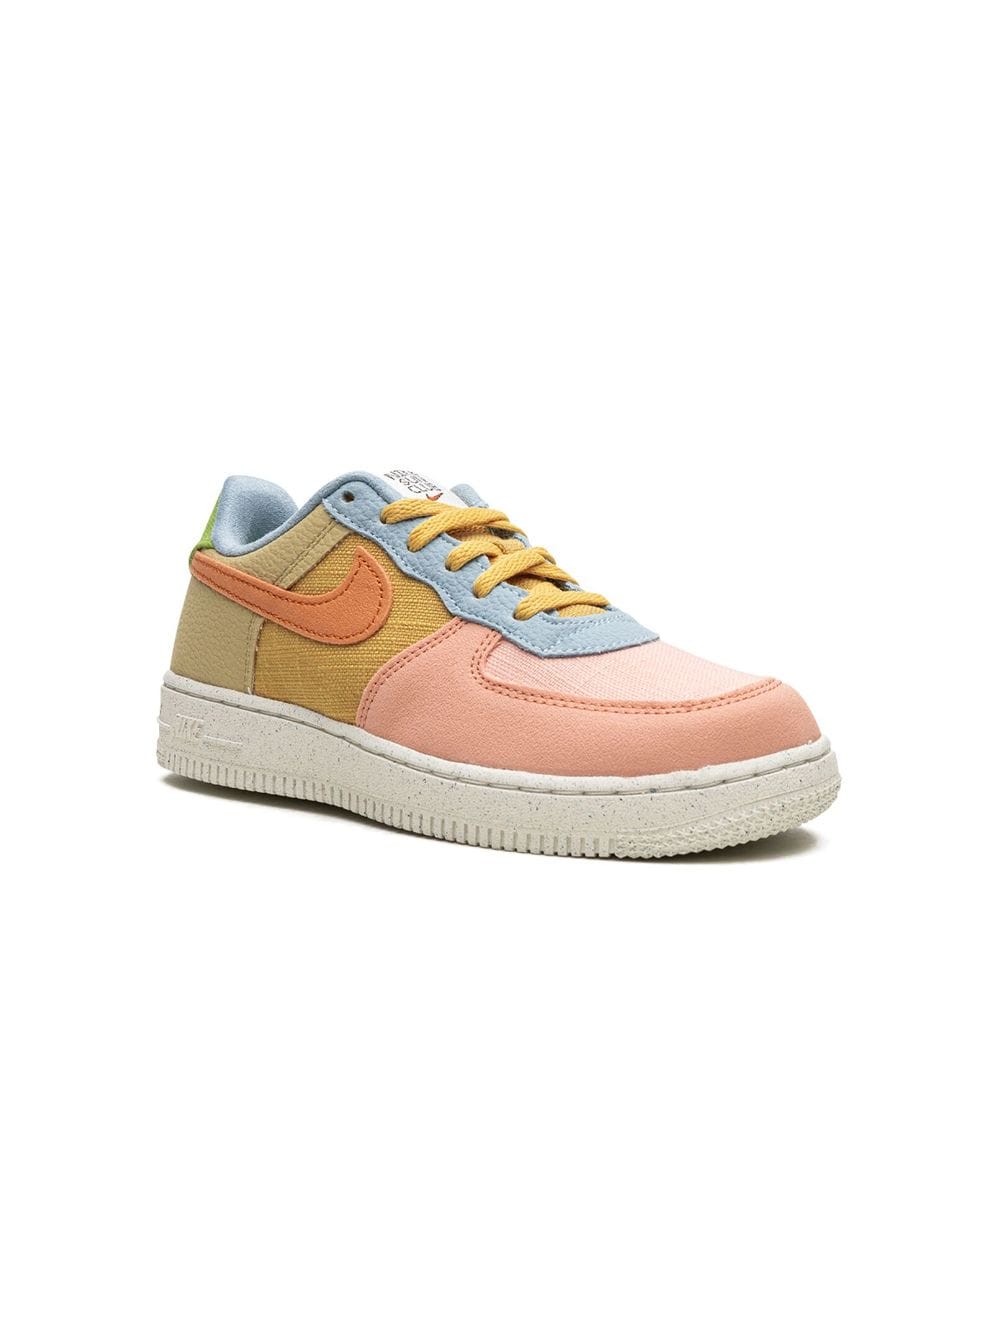 Nike Kids "Air Force 1 Low '07 LV8 ""Next Nature"" sneakers" - Roze